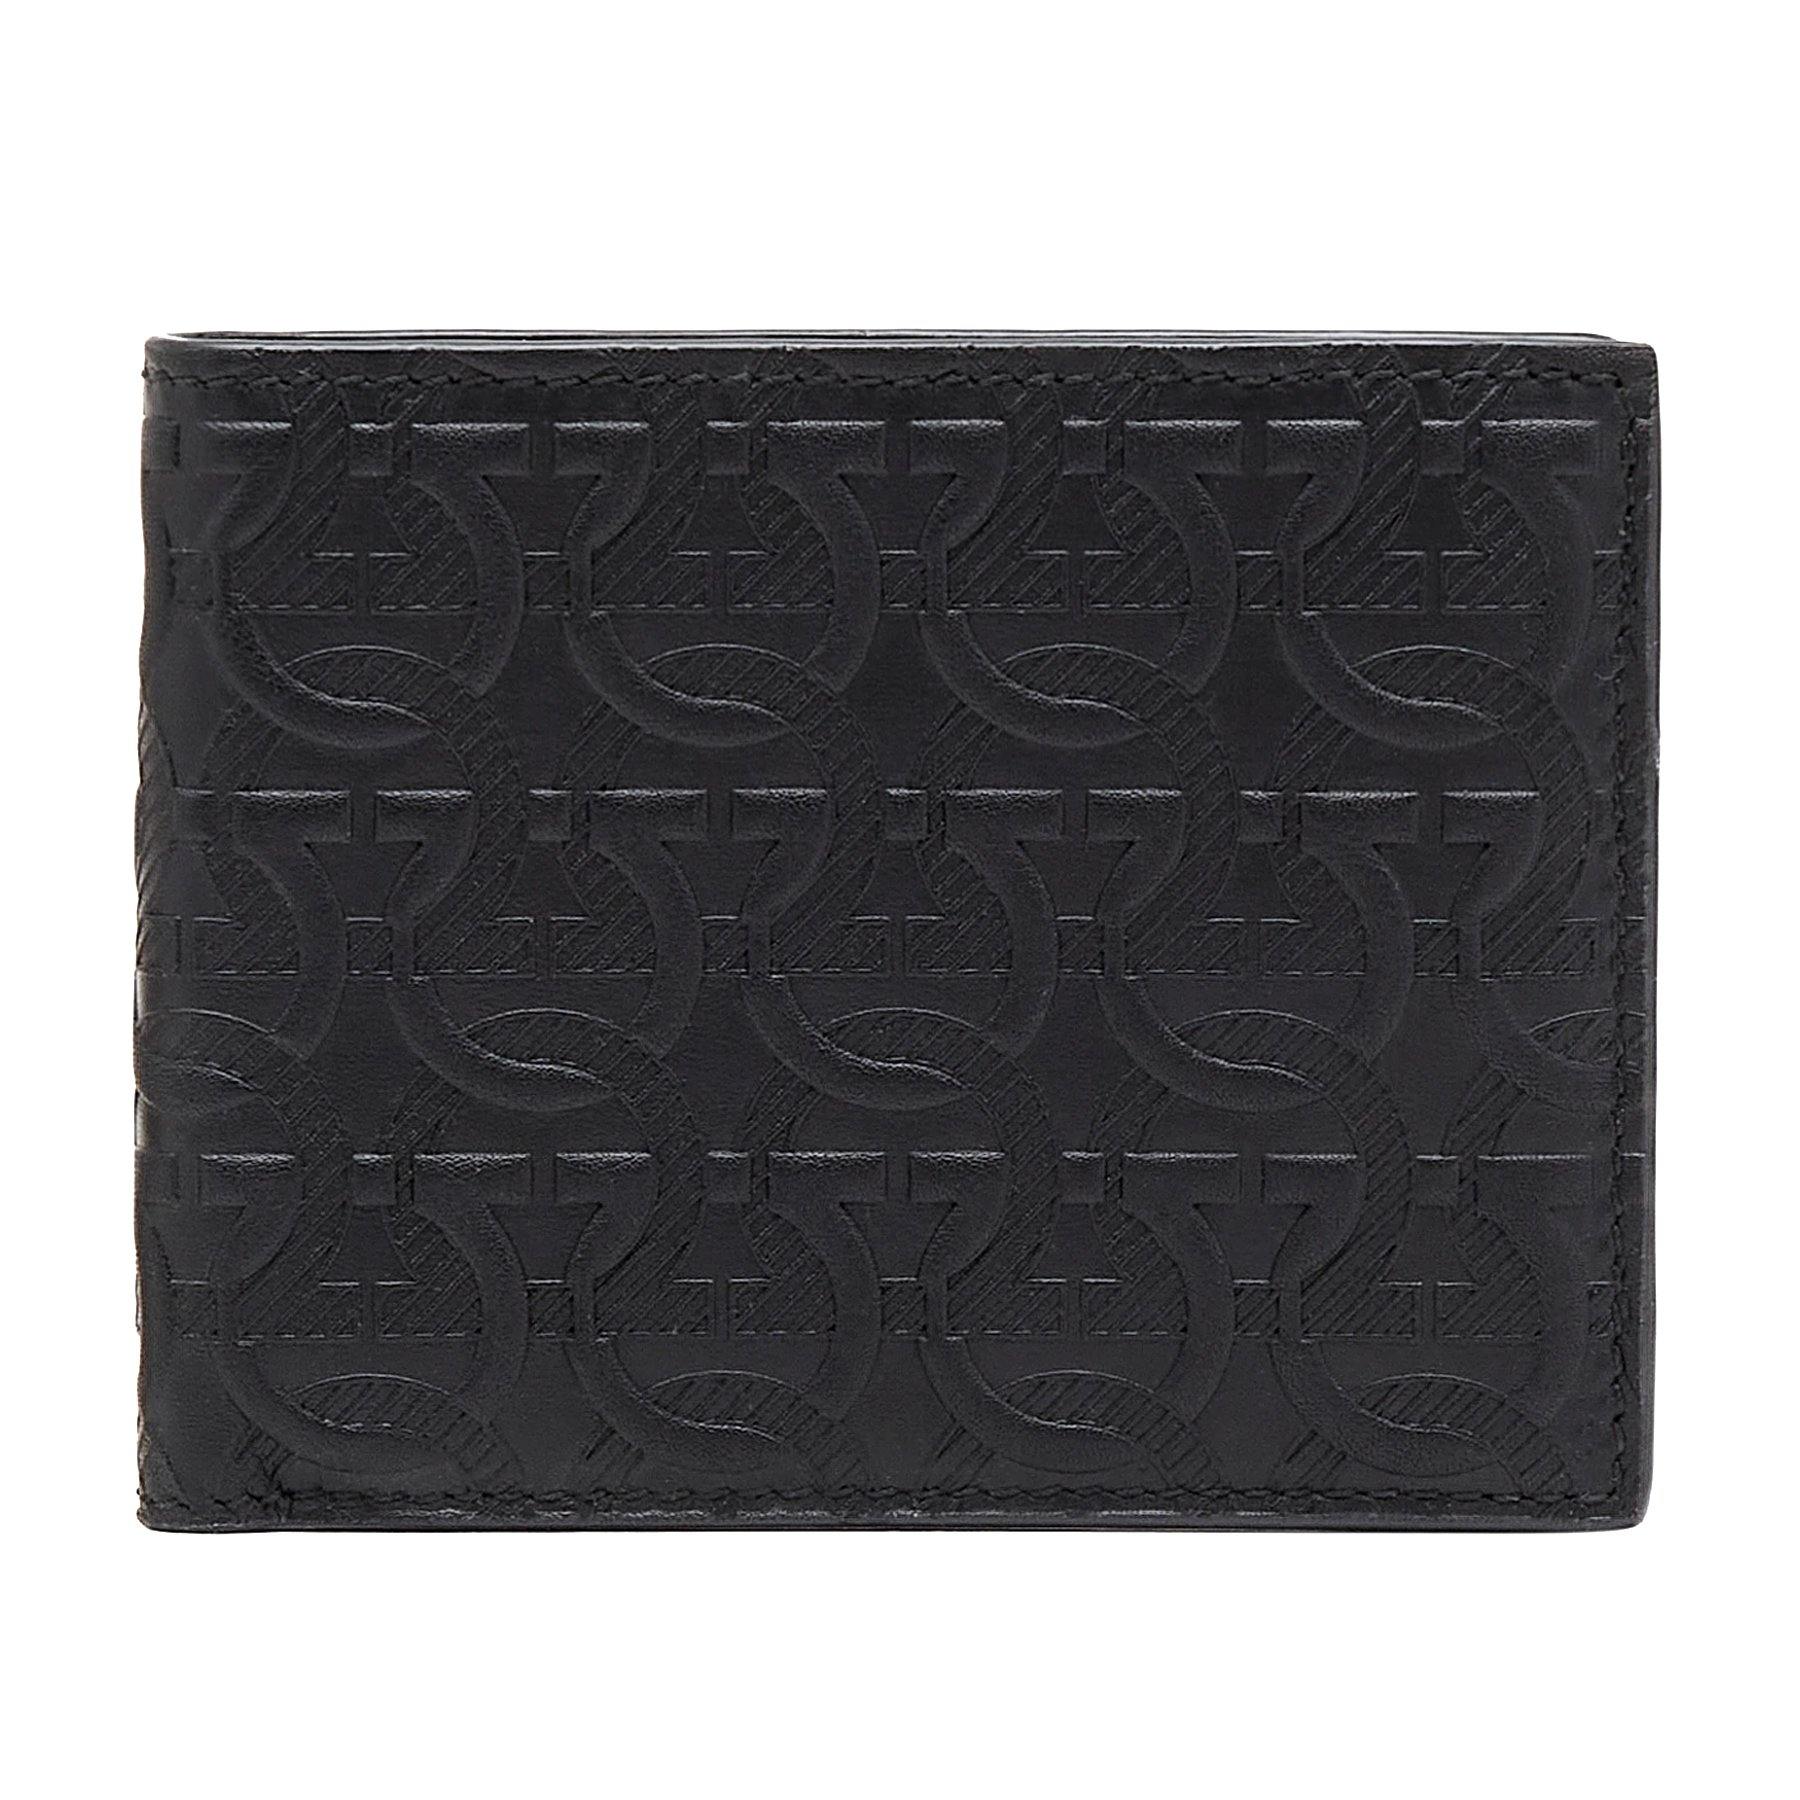 Gancini Wallet 66 A639 - Cosmos Boutique New Jersey